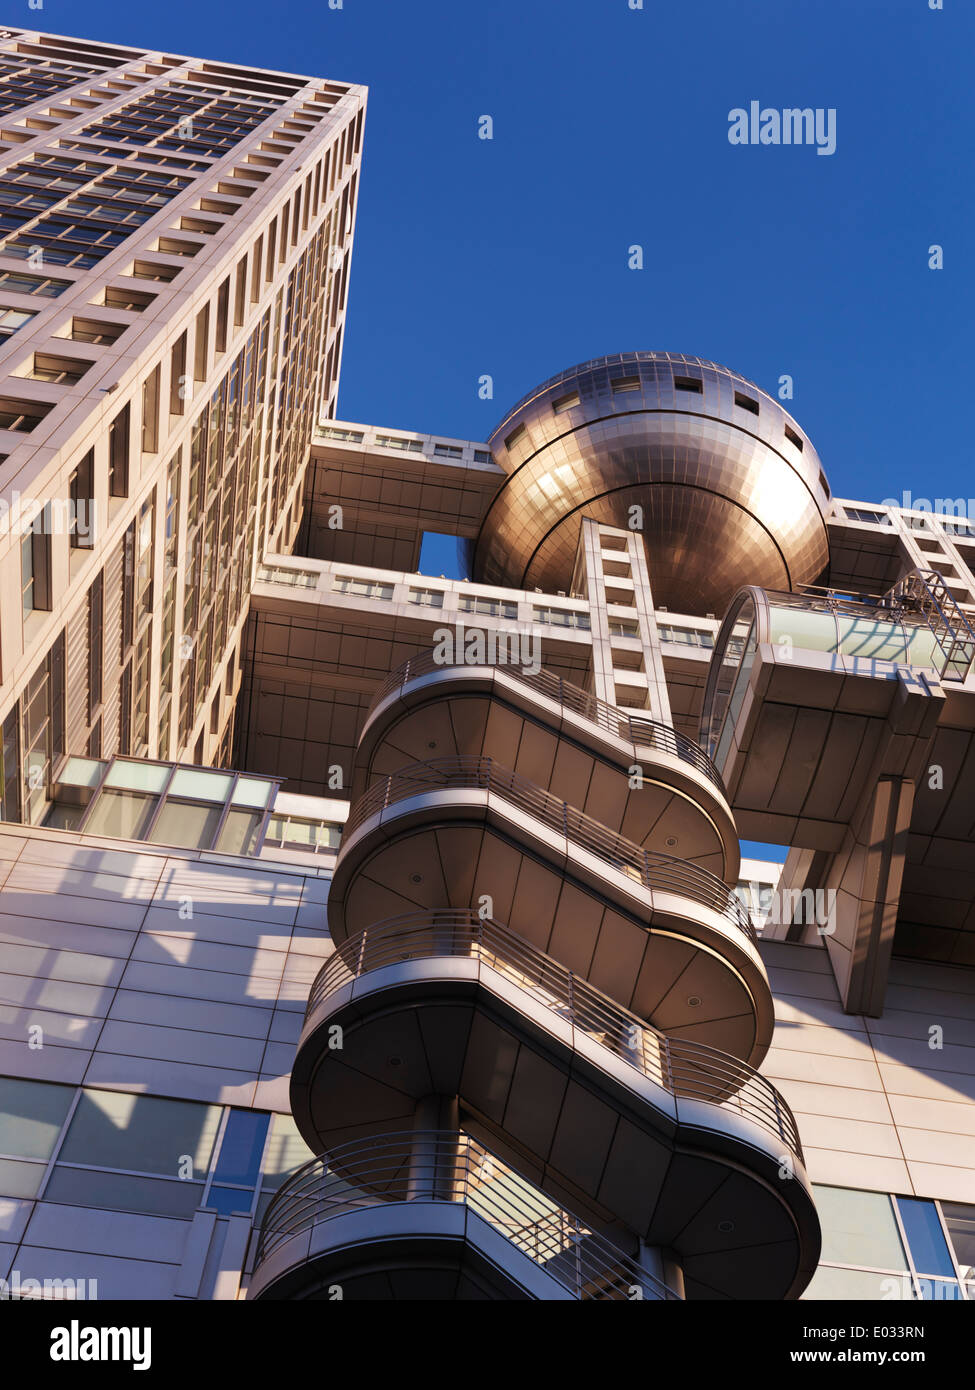 Observation deck sphere of Fuji Television Headquaters building in Odaiba, Tokyo, Japan Stock Photo